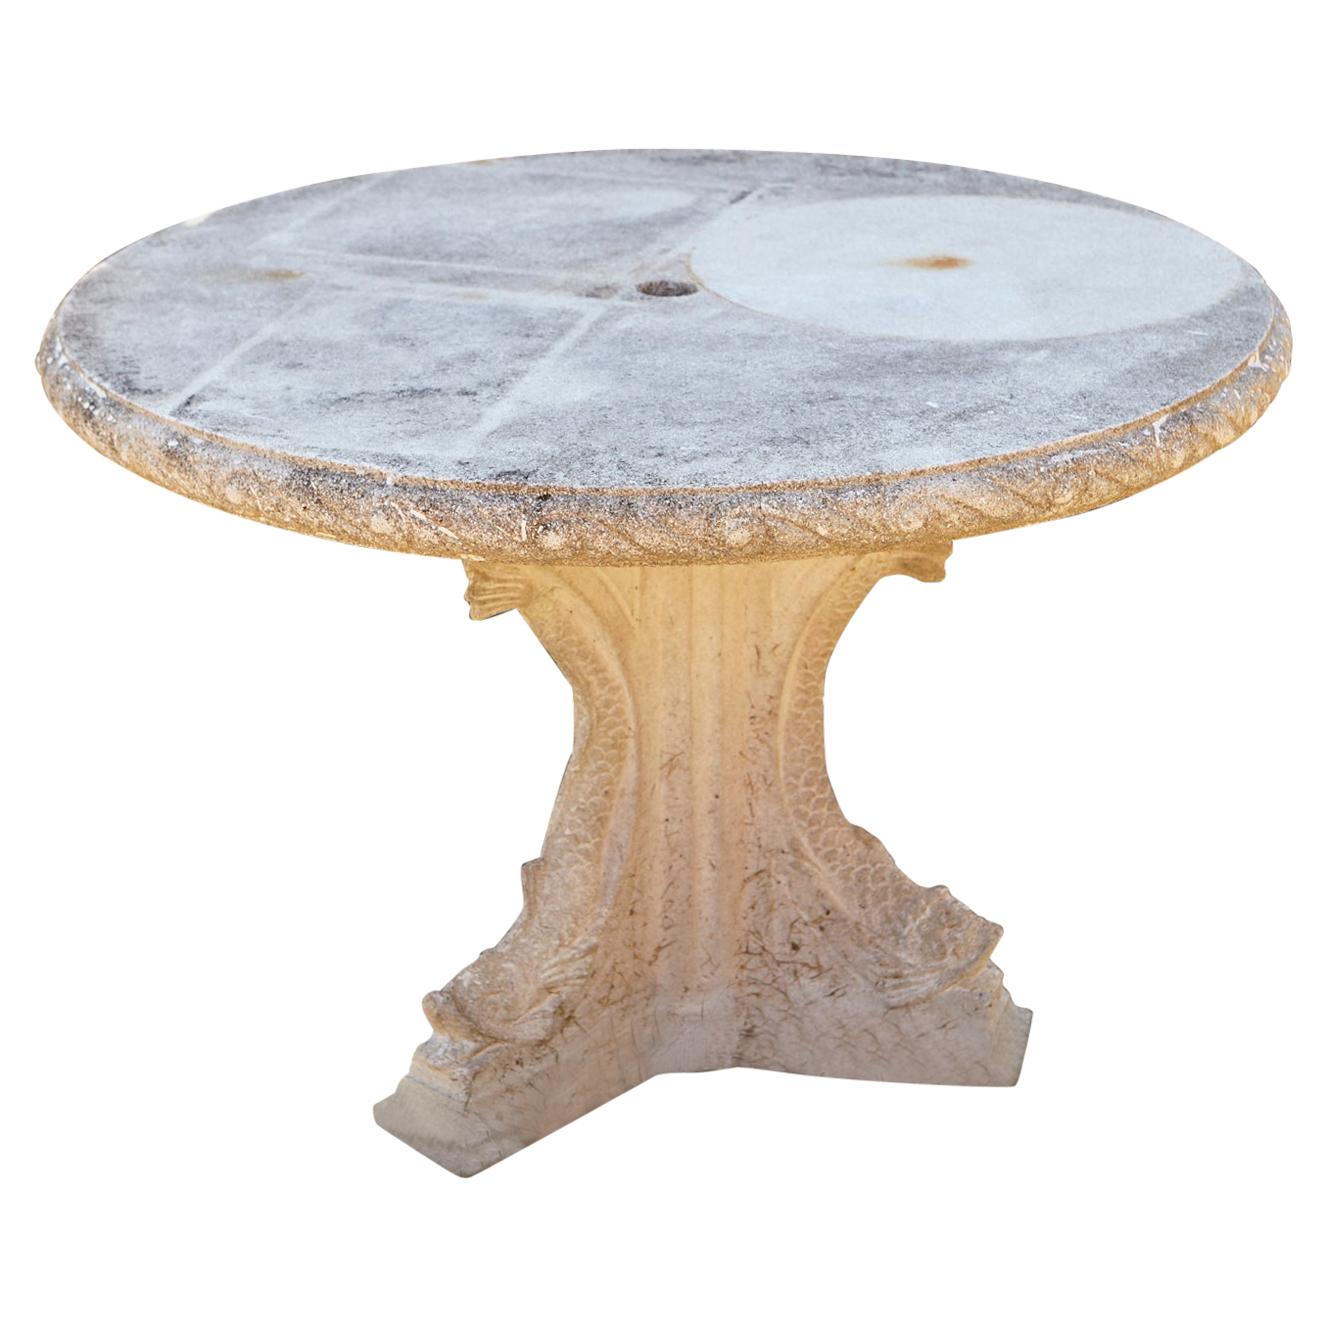 Cast Stone Center Table on Triangular Base with Decorative Elements, circa 1960s